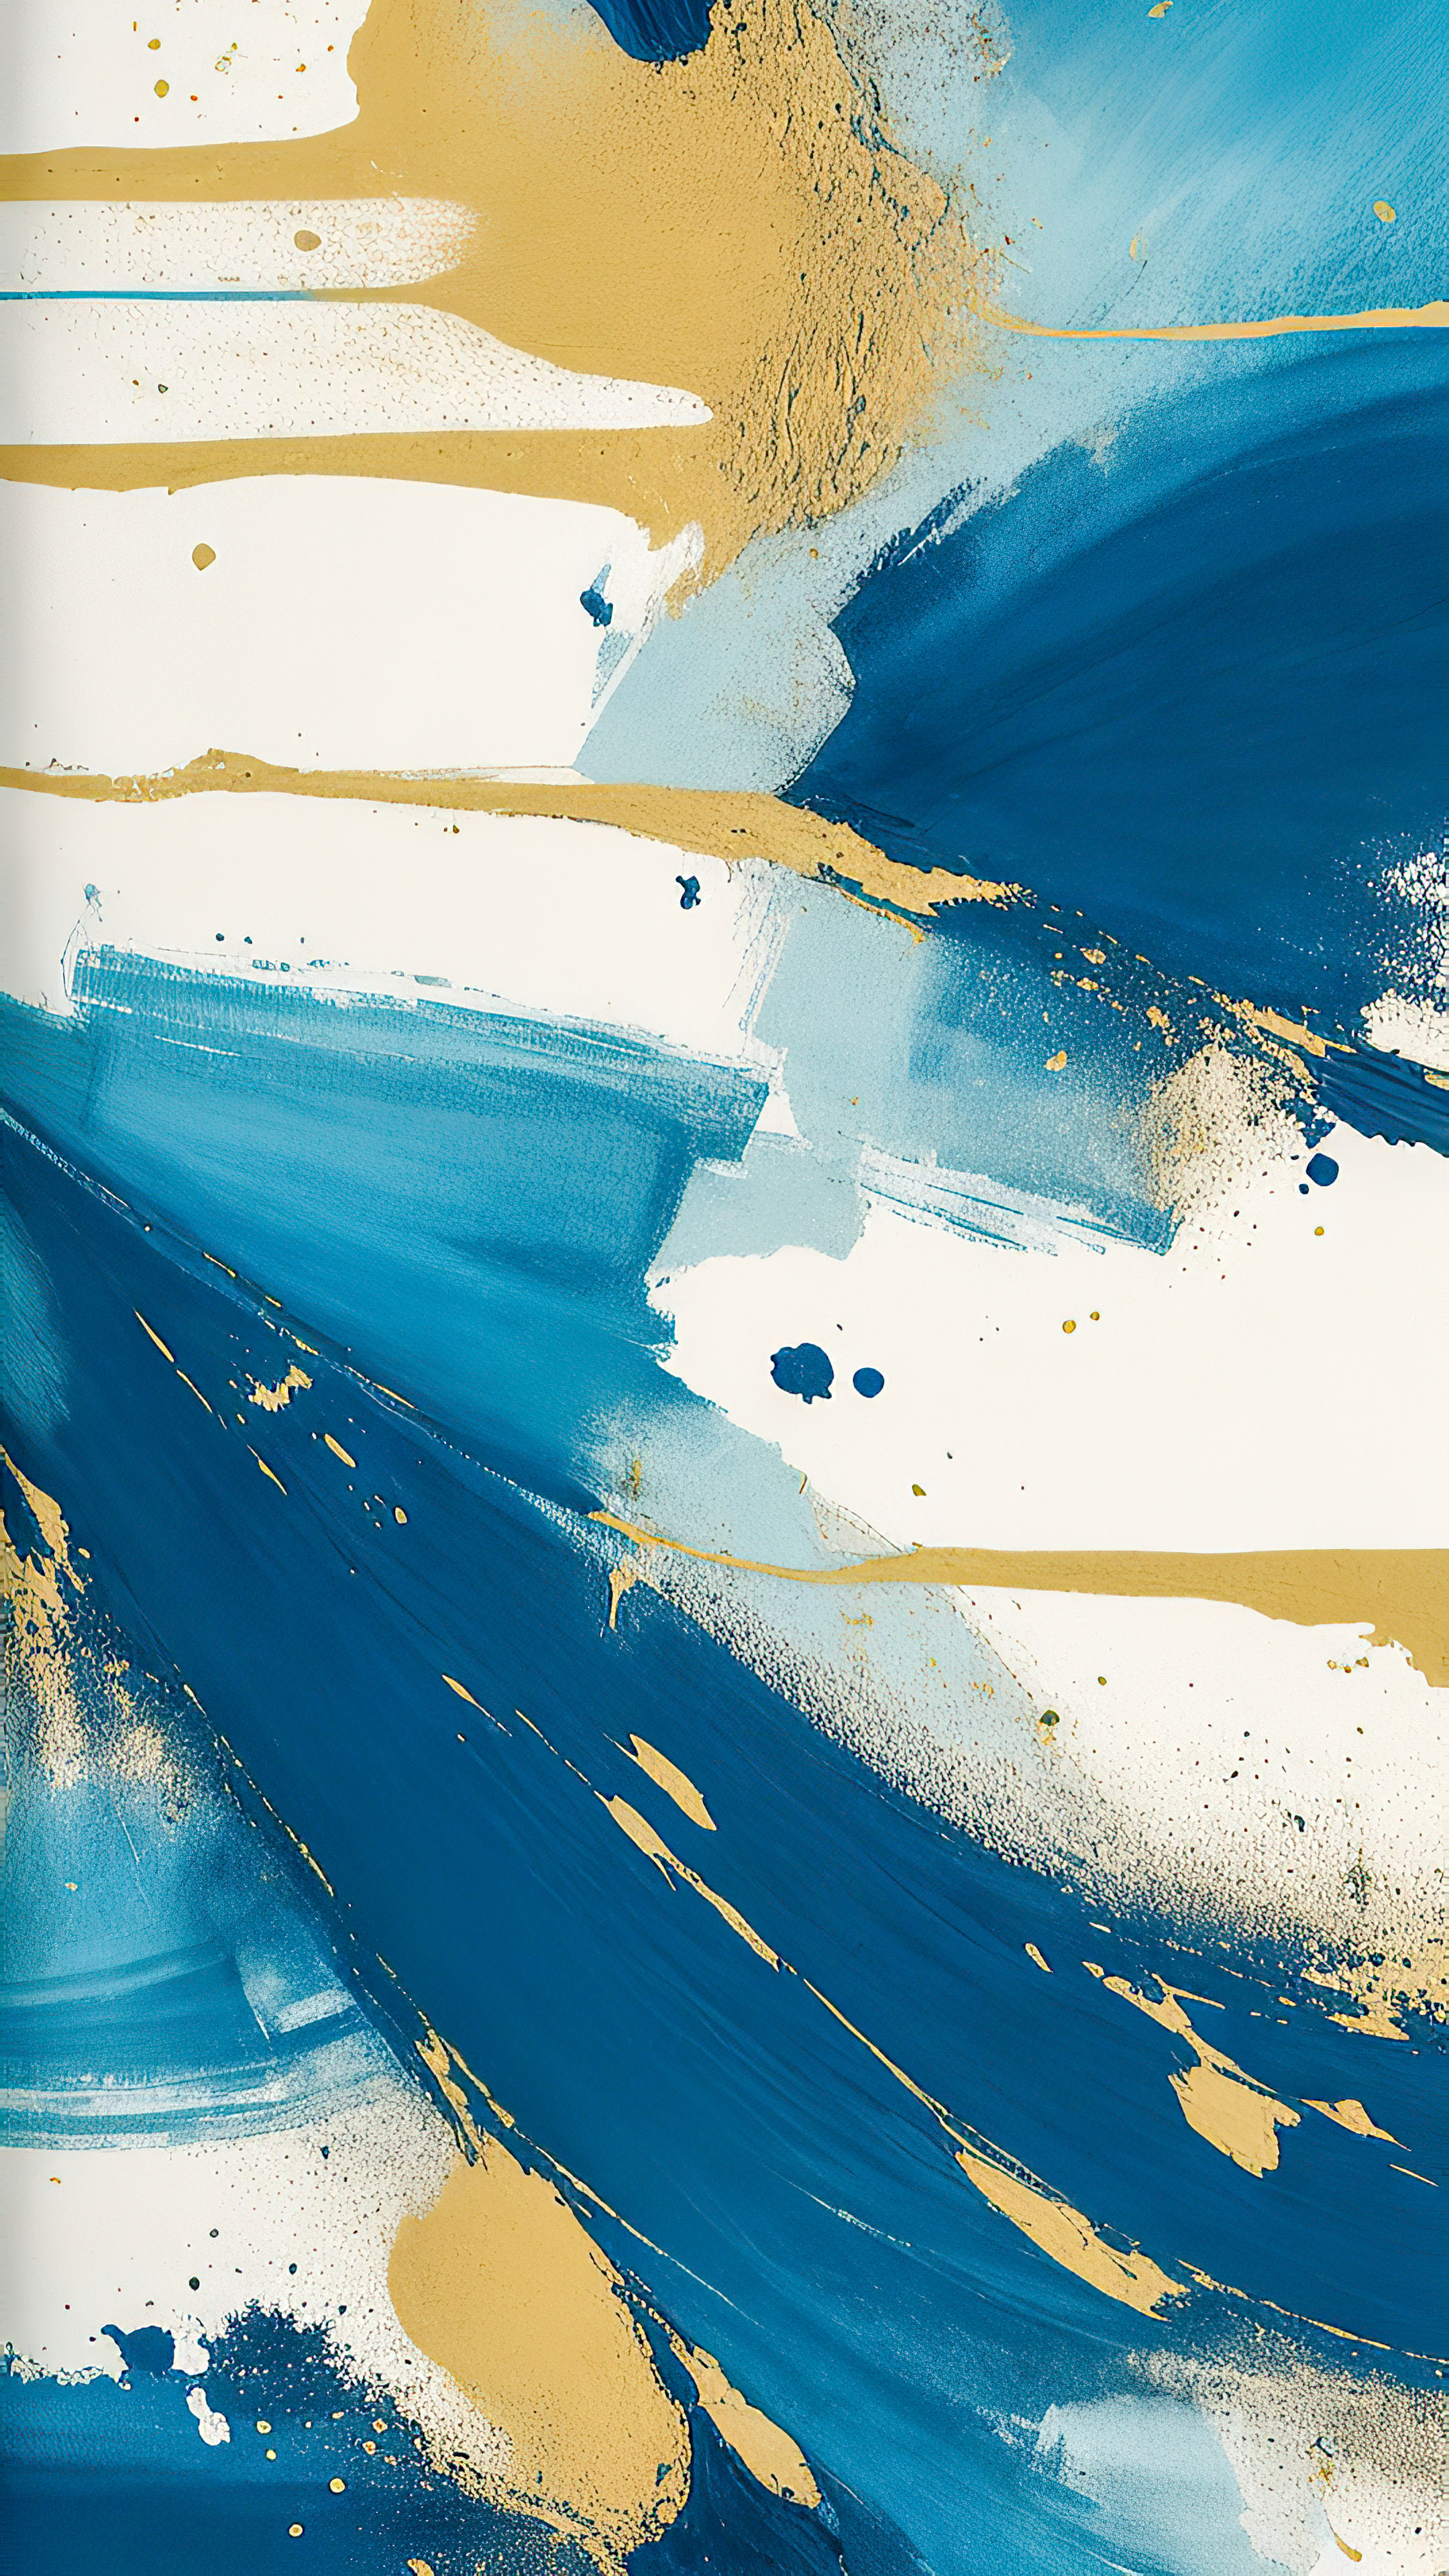 Step into artistic abstraction on your iPhone with 4K abstract wallpaper, featuring rough brushstrokes, smudges, and splatters.